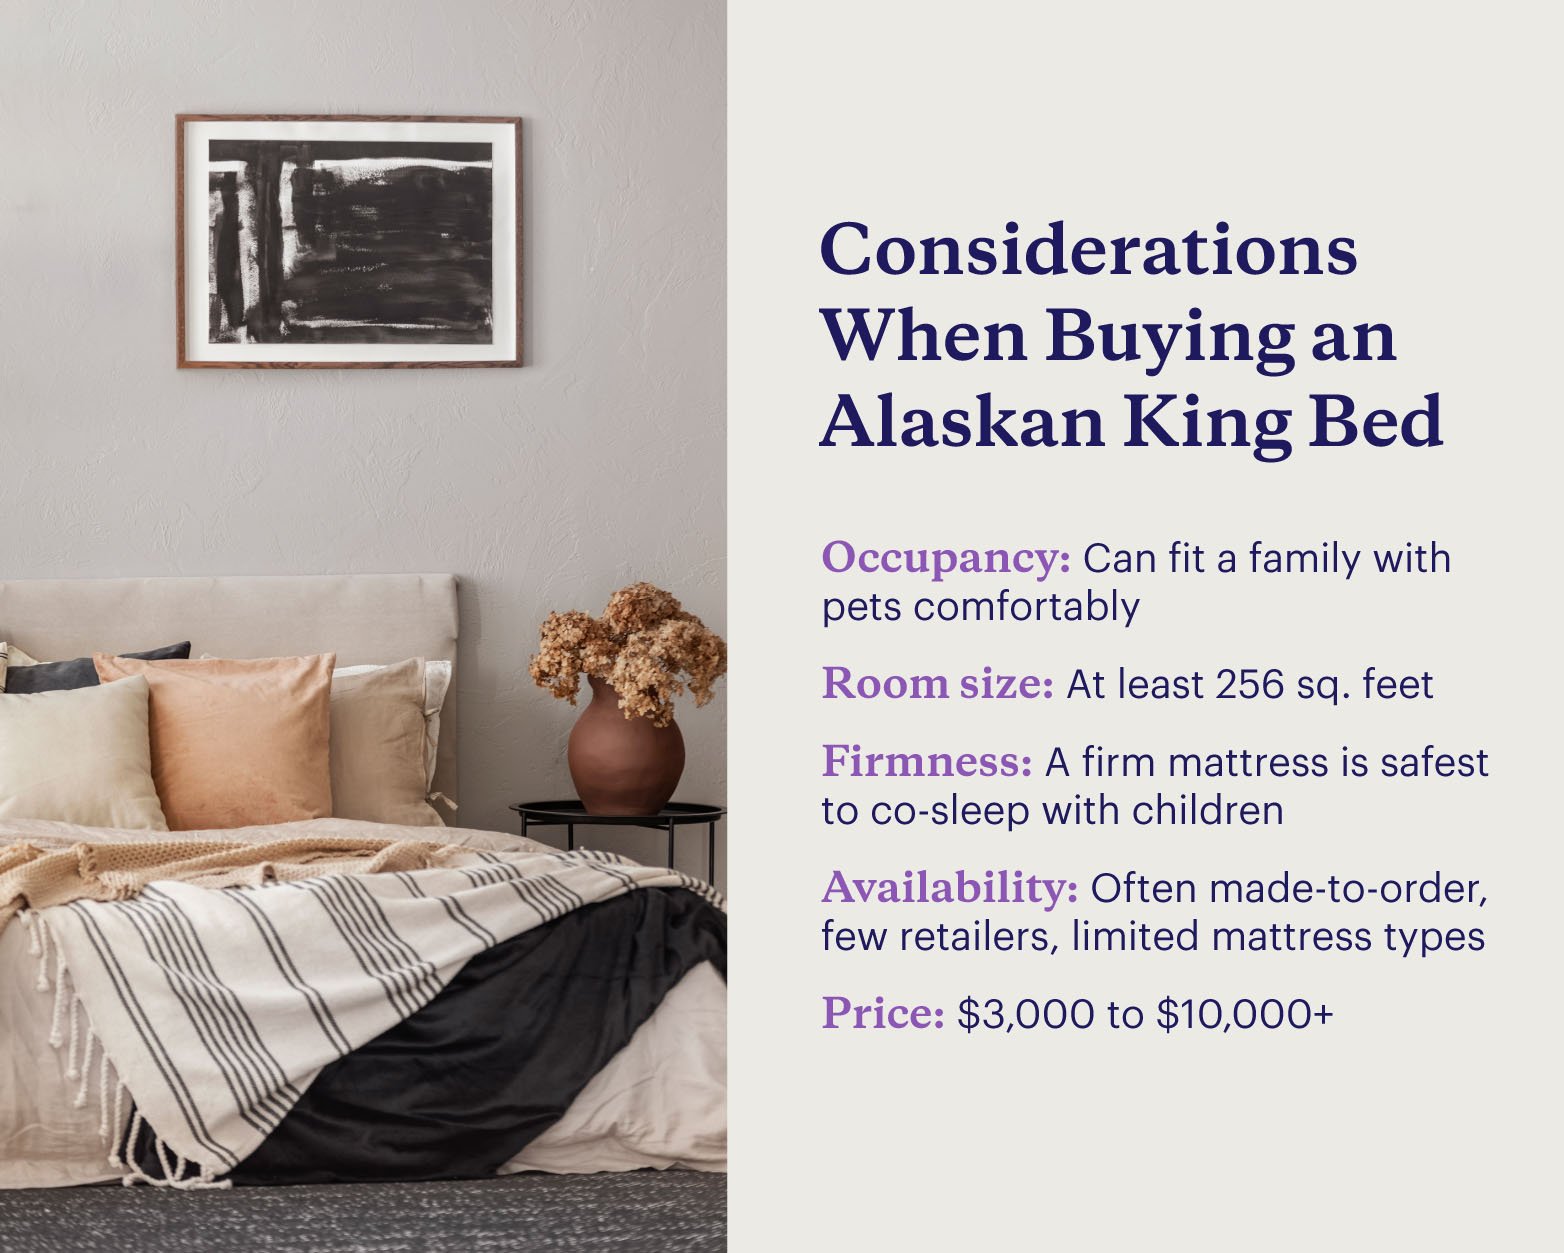 Five considerations for buying an Alaskan king bed including occupancy, room size, firmness, availability, and price.